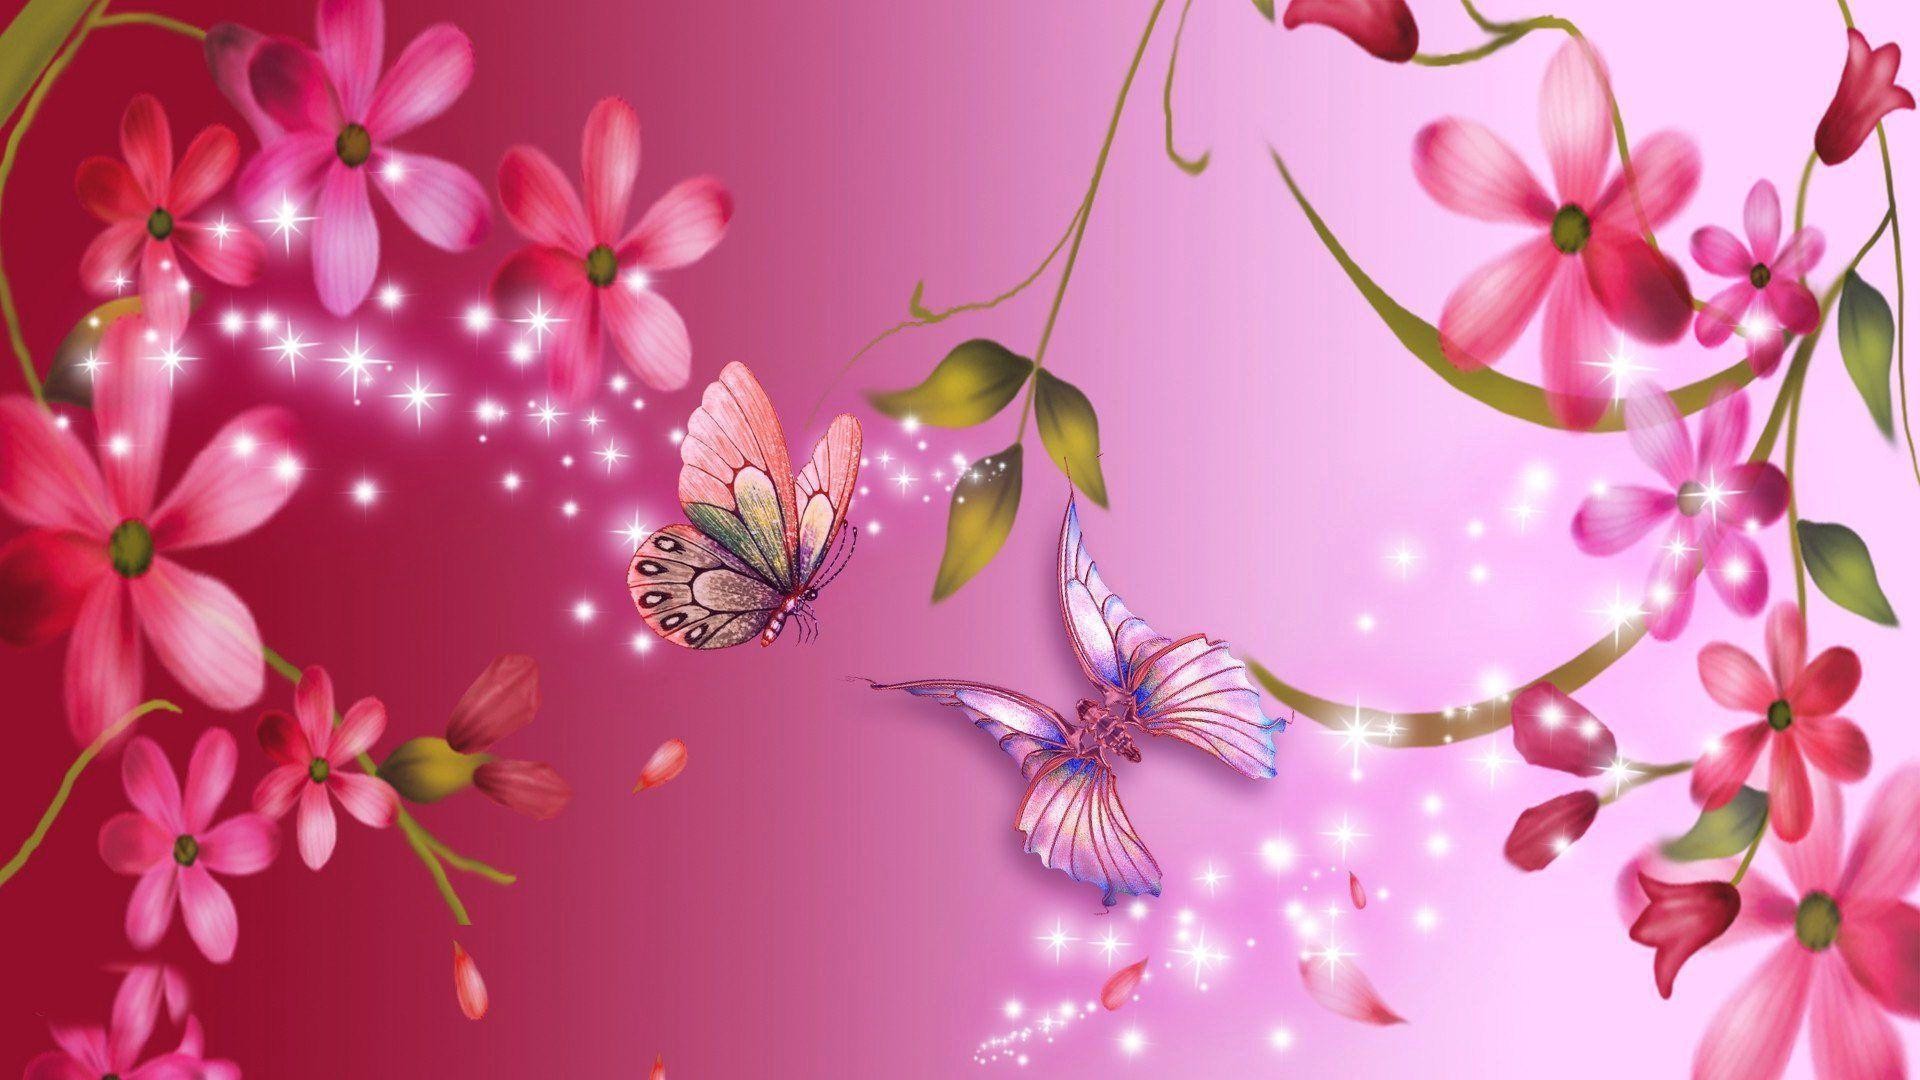 1920x1080 Wallpaper's Collection: Â«Pink Flowers WallpapersÂ»